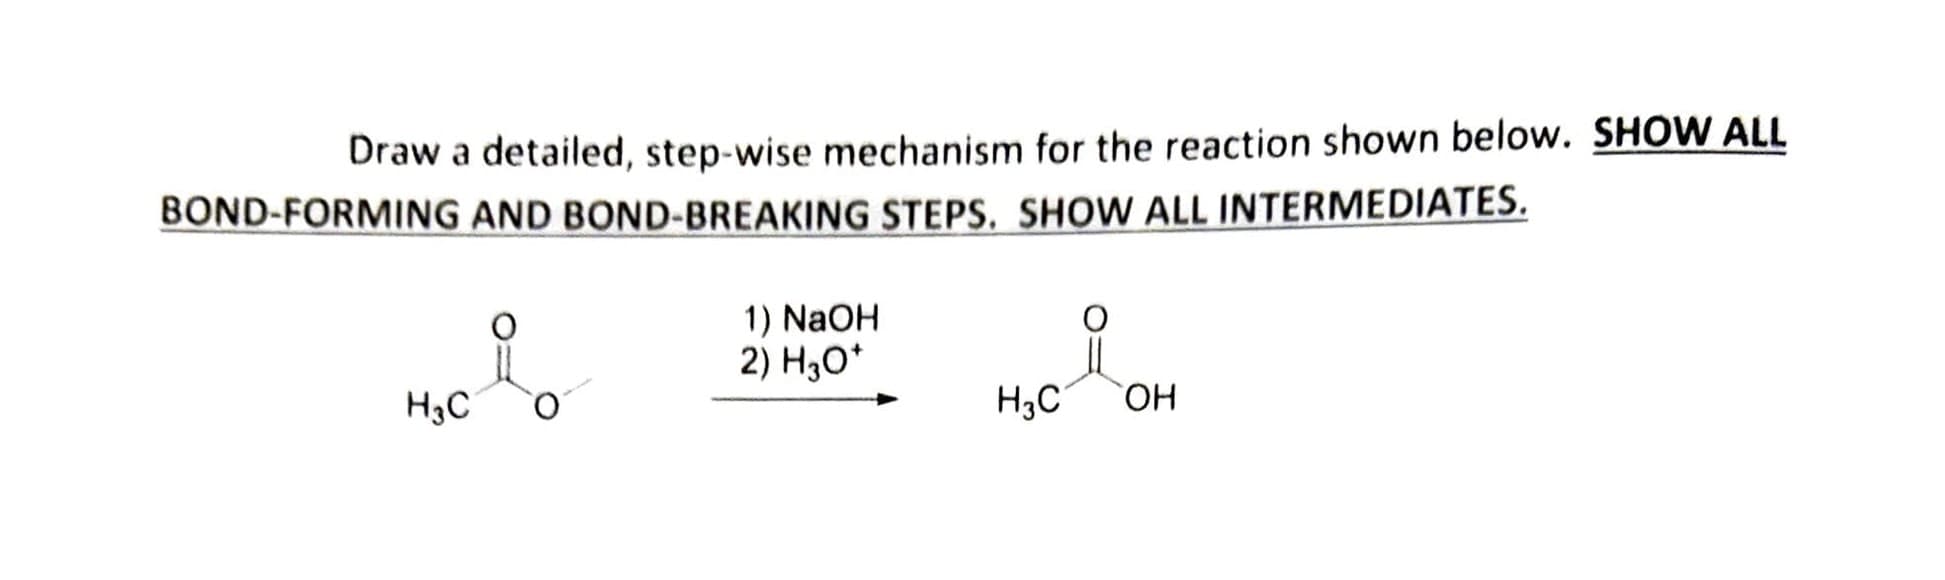 Draw a detailed, step-wise mechanism for the reaction shown below. SHOW ALL
BOND-FORMING AND BOND-BREAKING STEPS. SHOW ALL INTERMEDIATES.
1) NaOH
2) H3O*
H3C
H3C
HO
